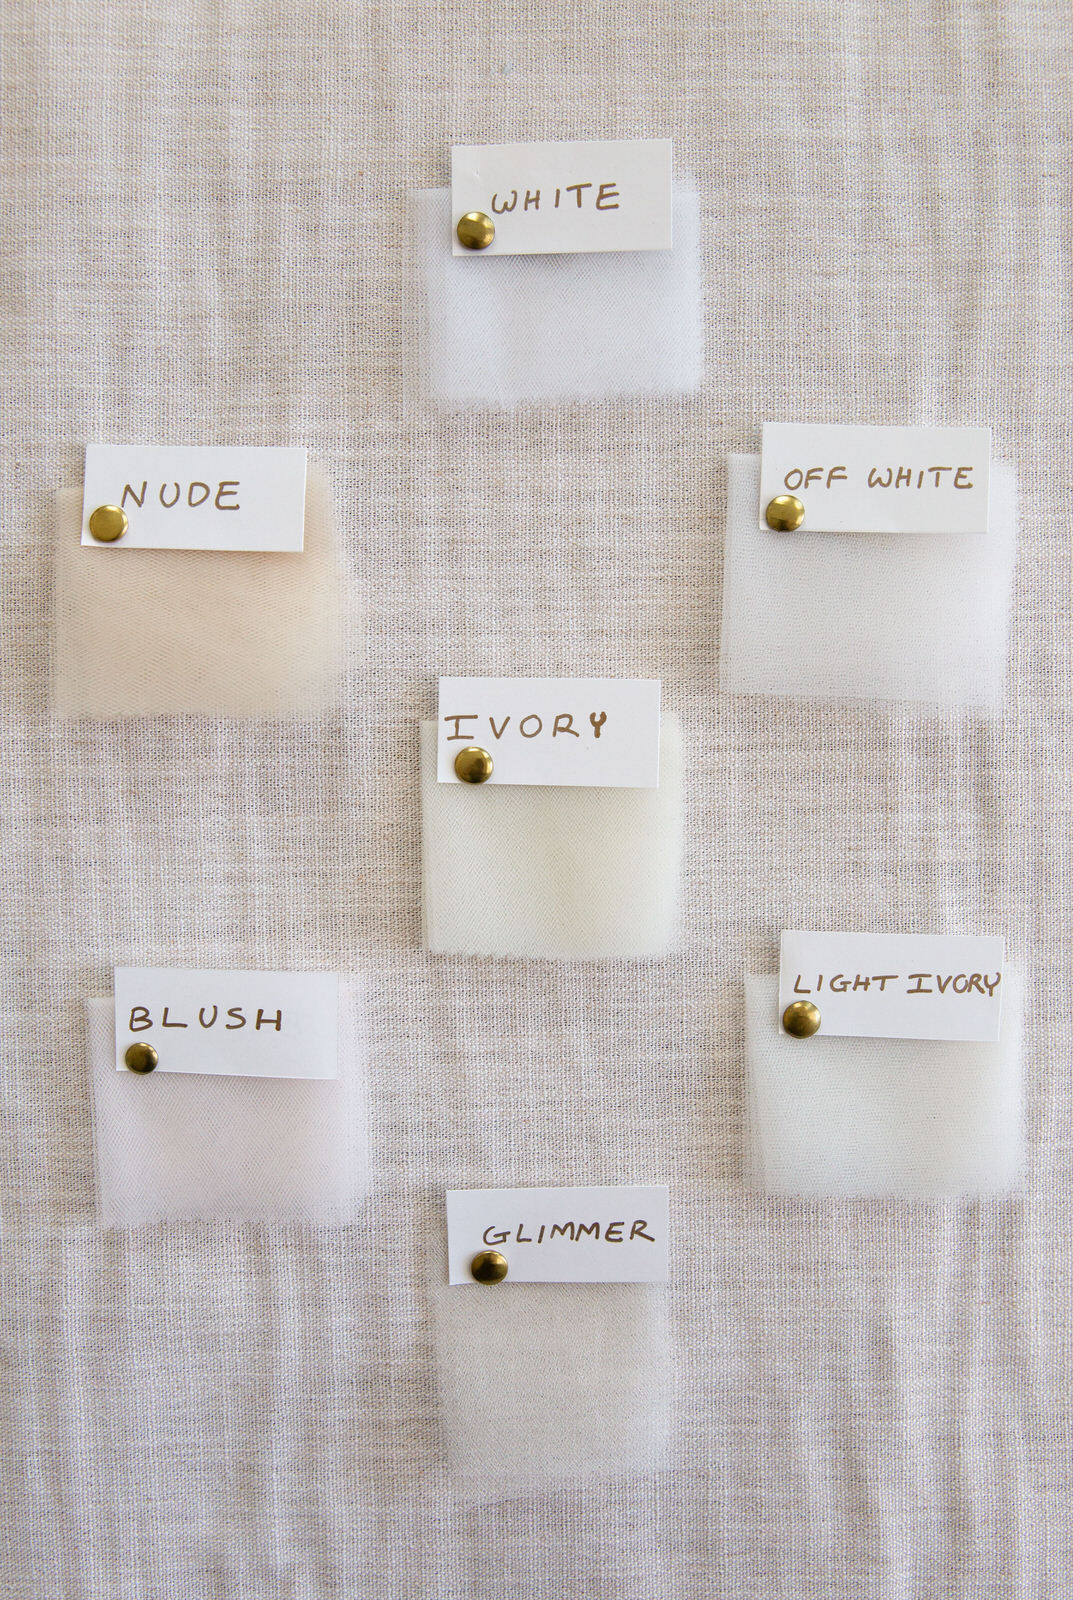 white off white and Ivory color swatches of fabric